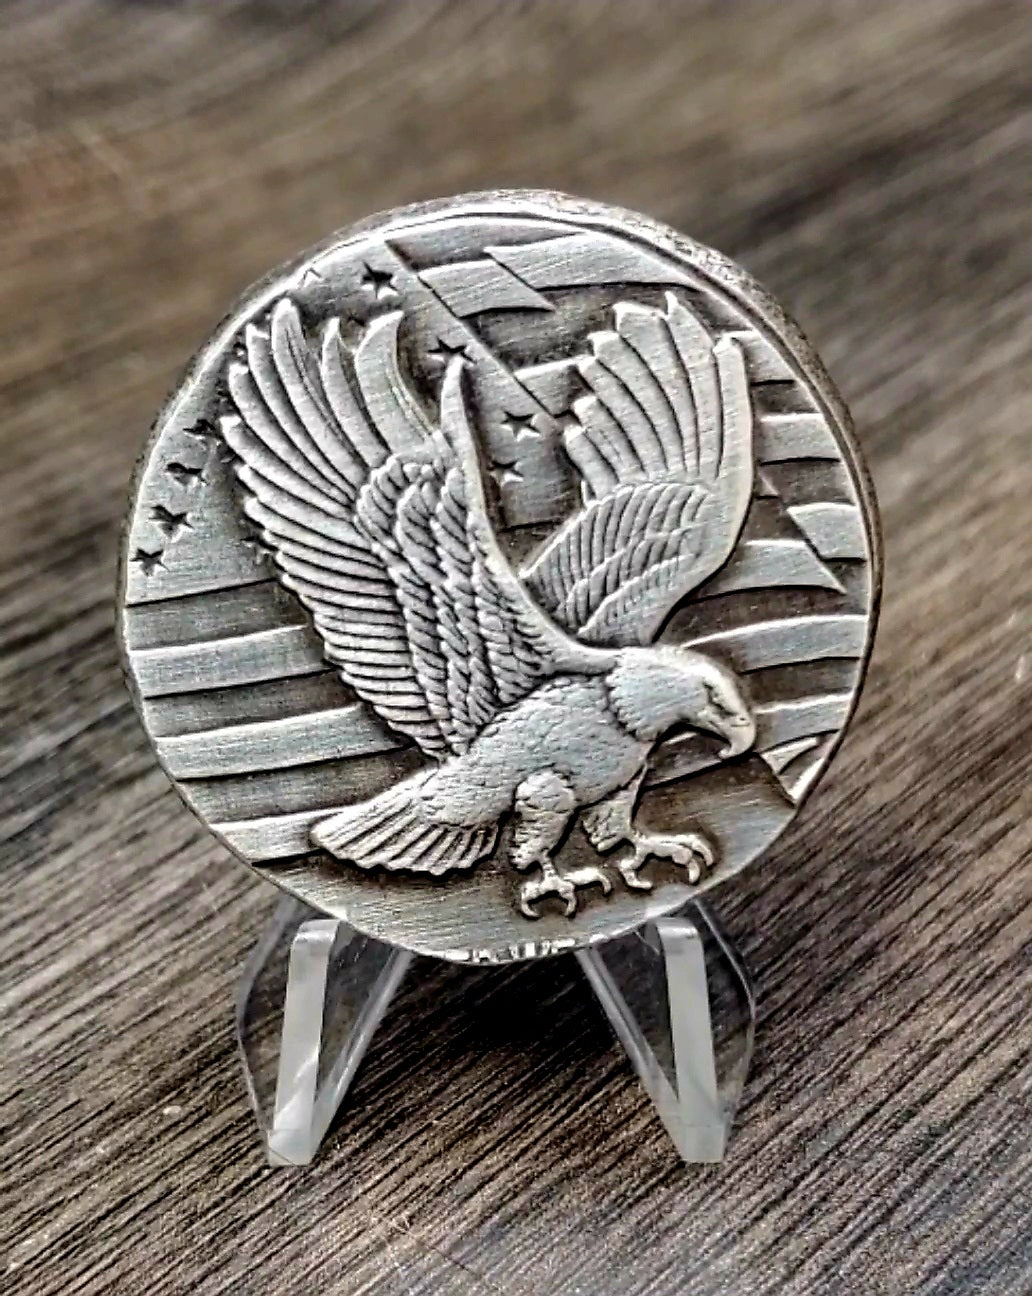 Hand poured pressed silver art rounds, Eagle BEX Mint